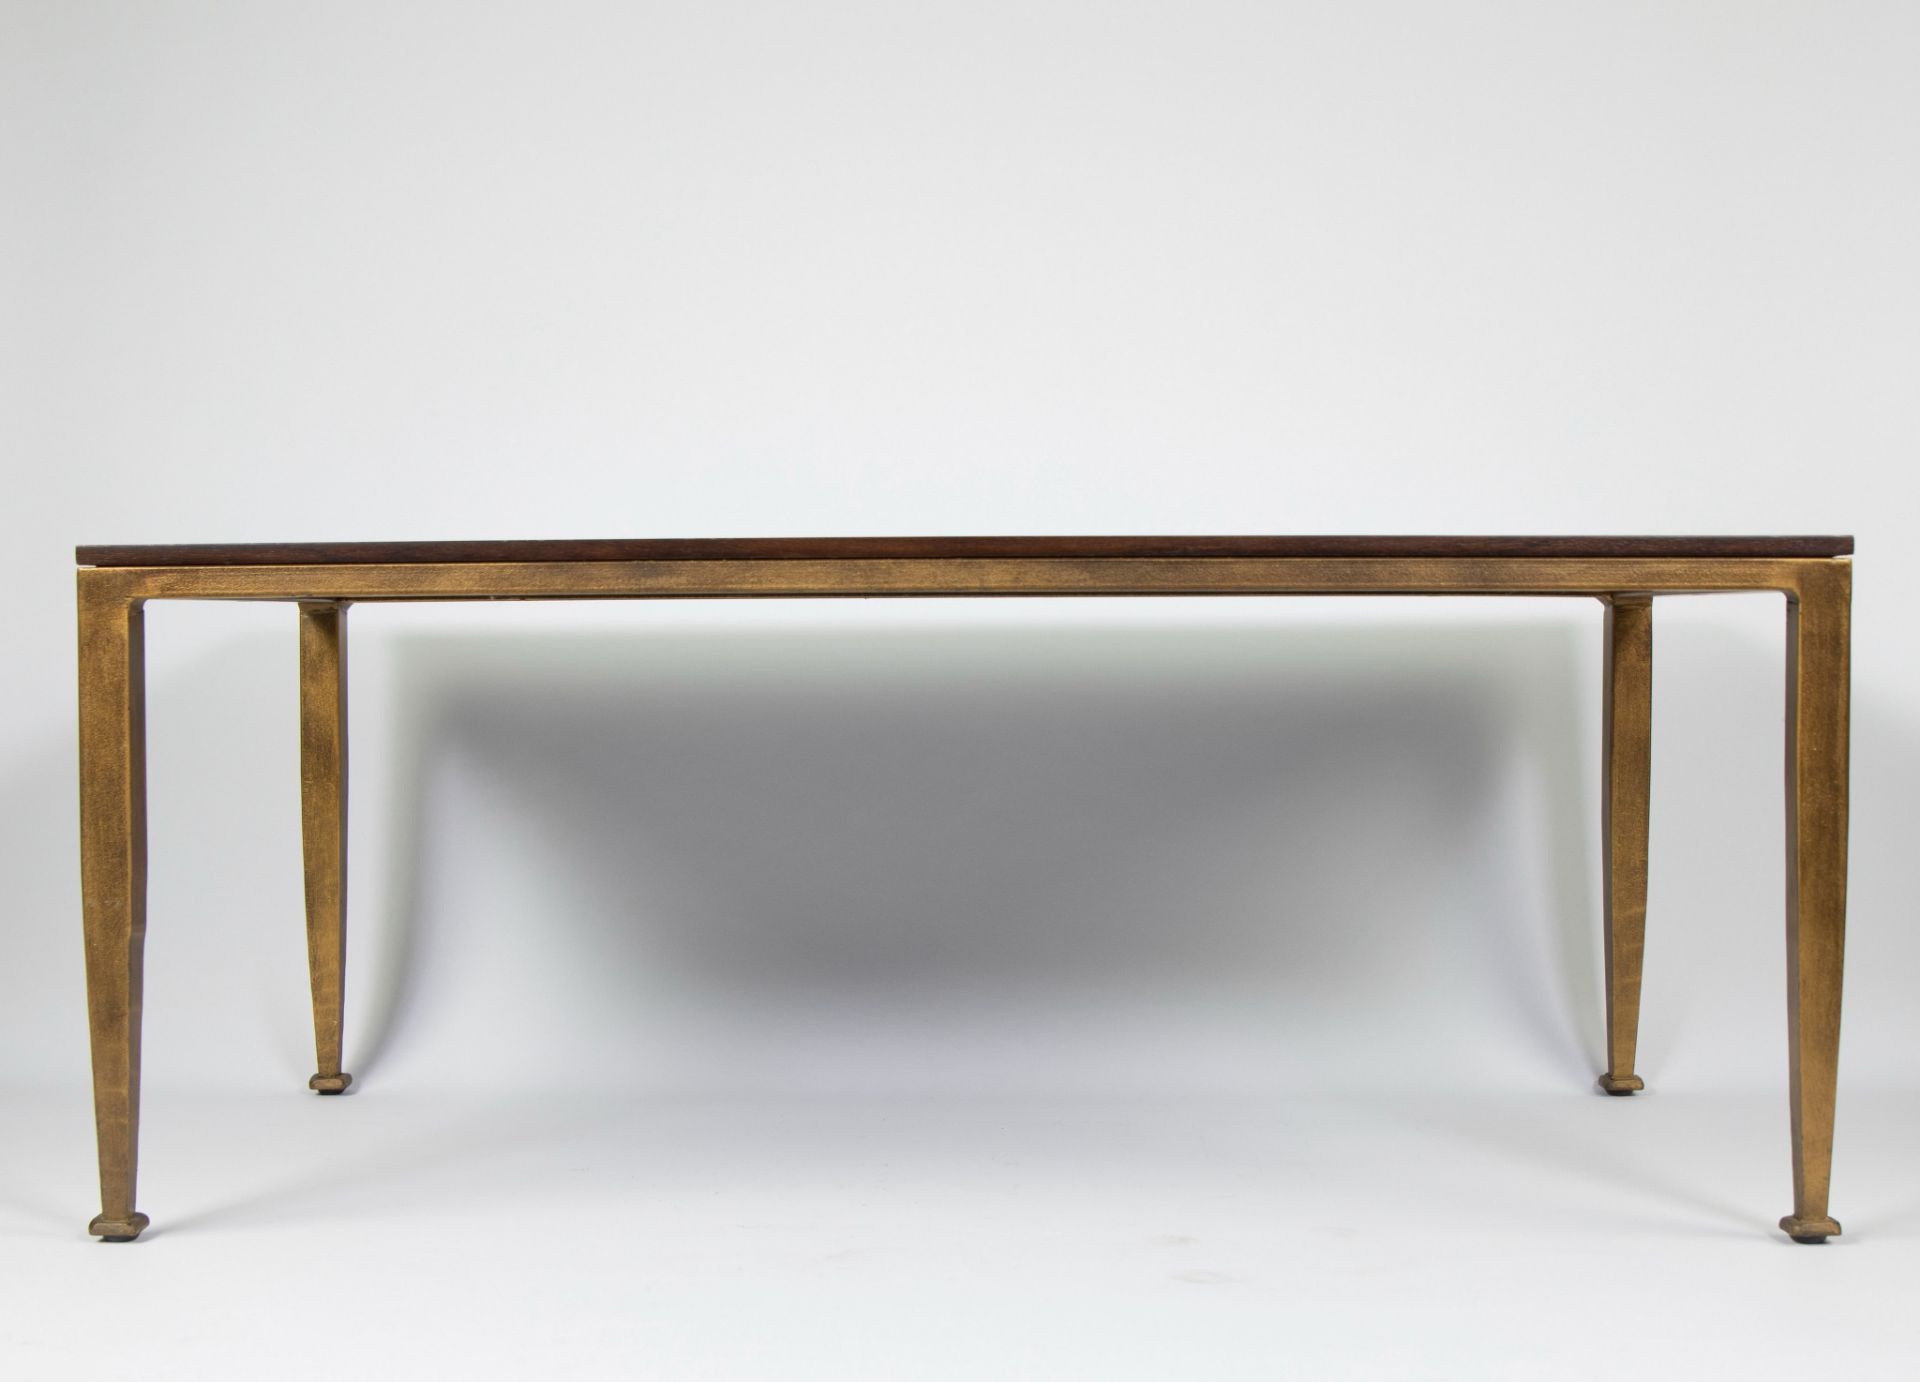 Vintage coffee table with shagreen leather and tropical wood - Image 2 of 3